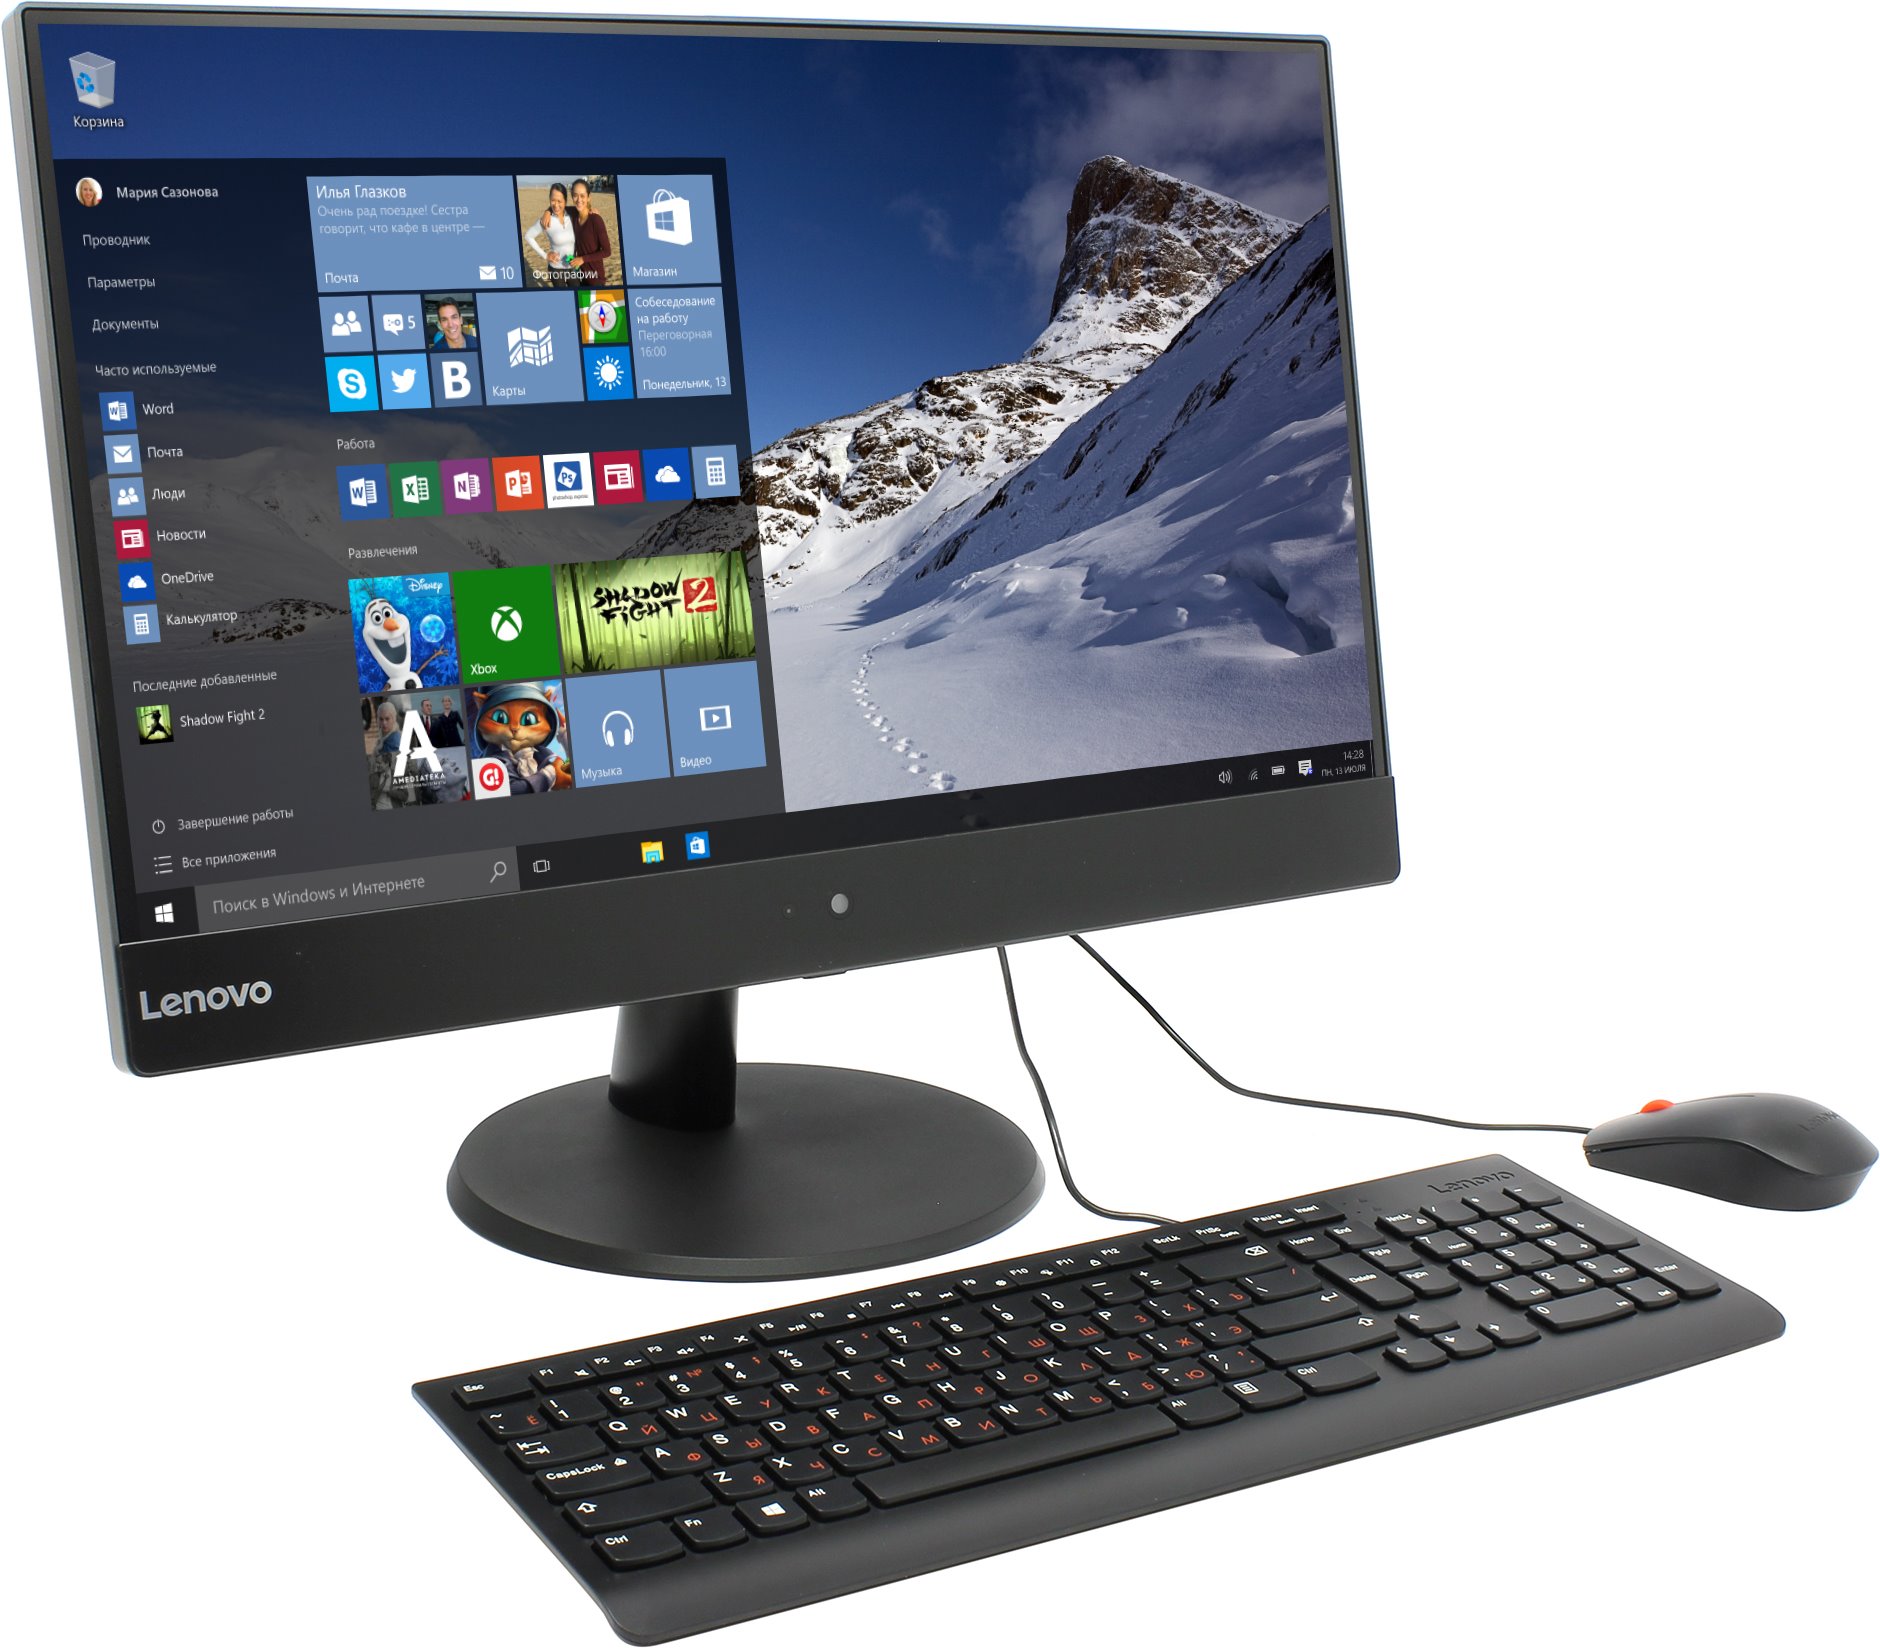 Моноблок Lenovo V510z All-In-One 23" FHD (1920x1080)  MS i5-7400T 4Gb 500GB Intel HD DVD±RW AC+BT USB KB&Mouse Win10 Pro64 1Y carry-in